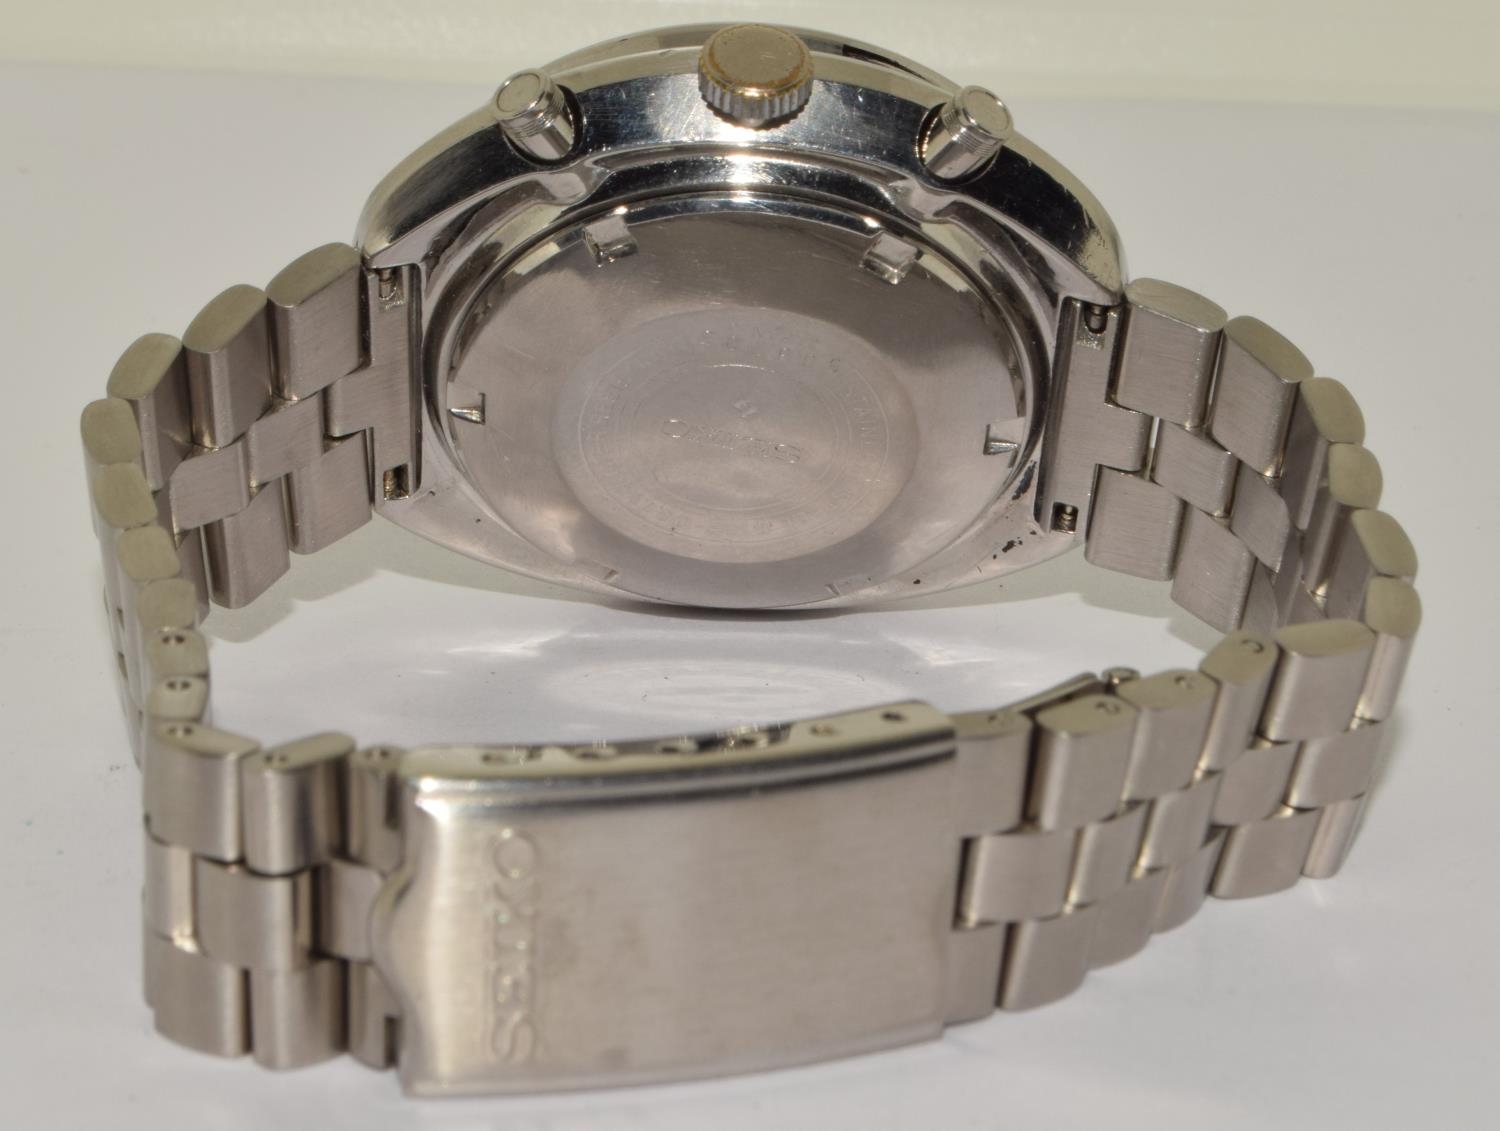 Vintage Seiko 'UFO' chronograph ref: 6138-0011. Serial no. dates this watch to October 1975. Good - Image 5 of 6